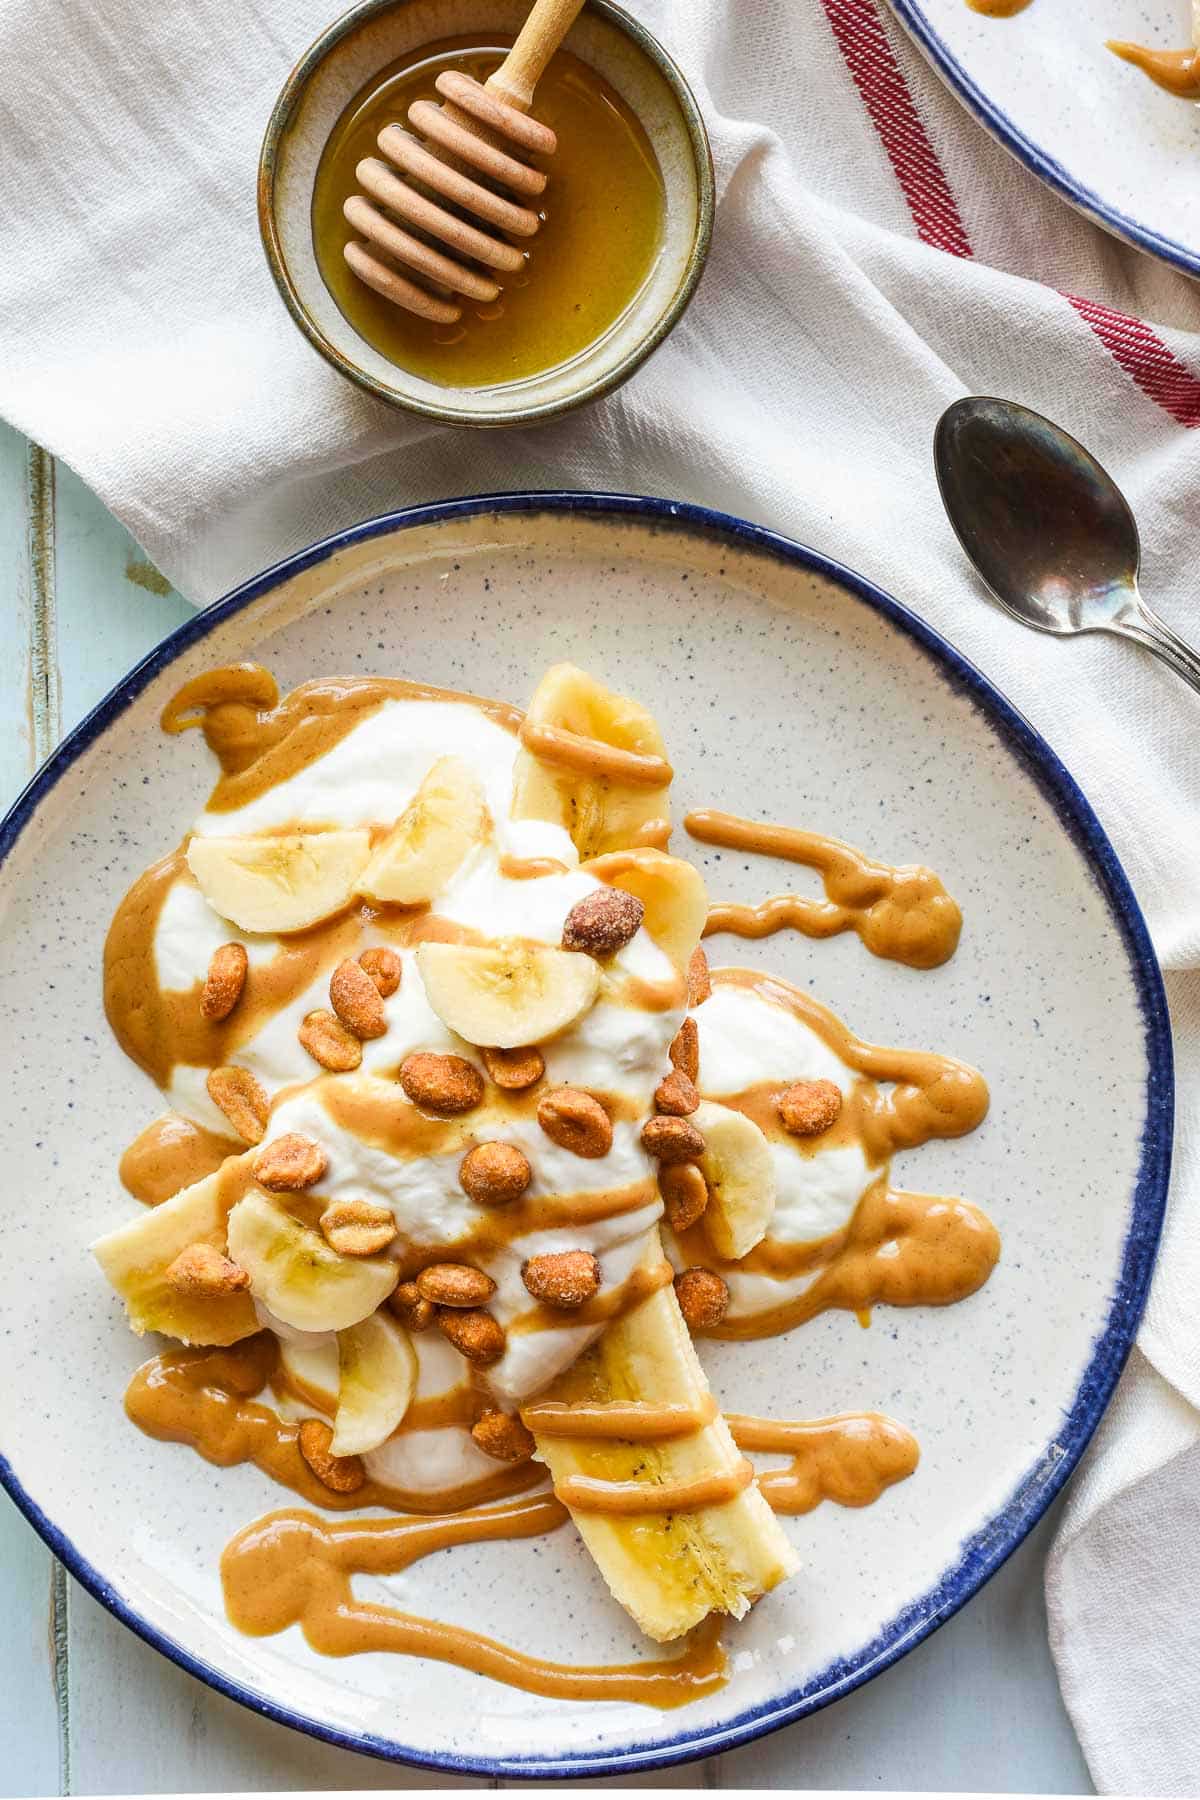 Sliced banana topped with yogurt, honey roasted peanuts, and honey peanut butter drizzle.